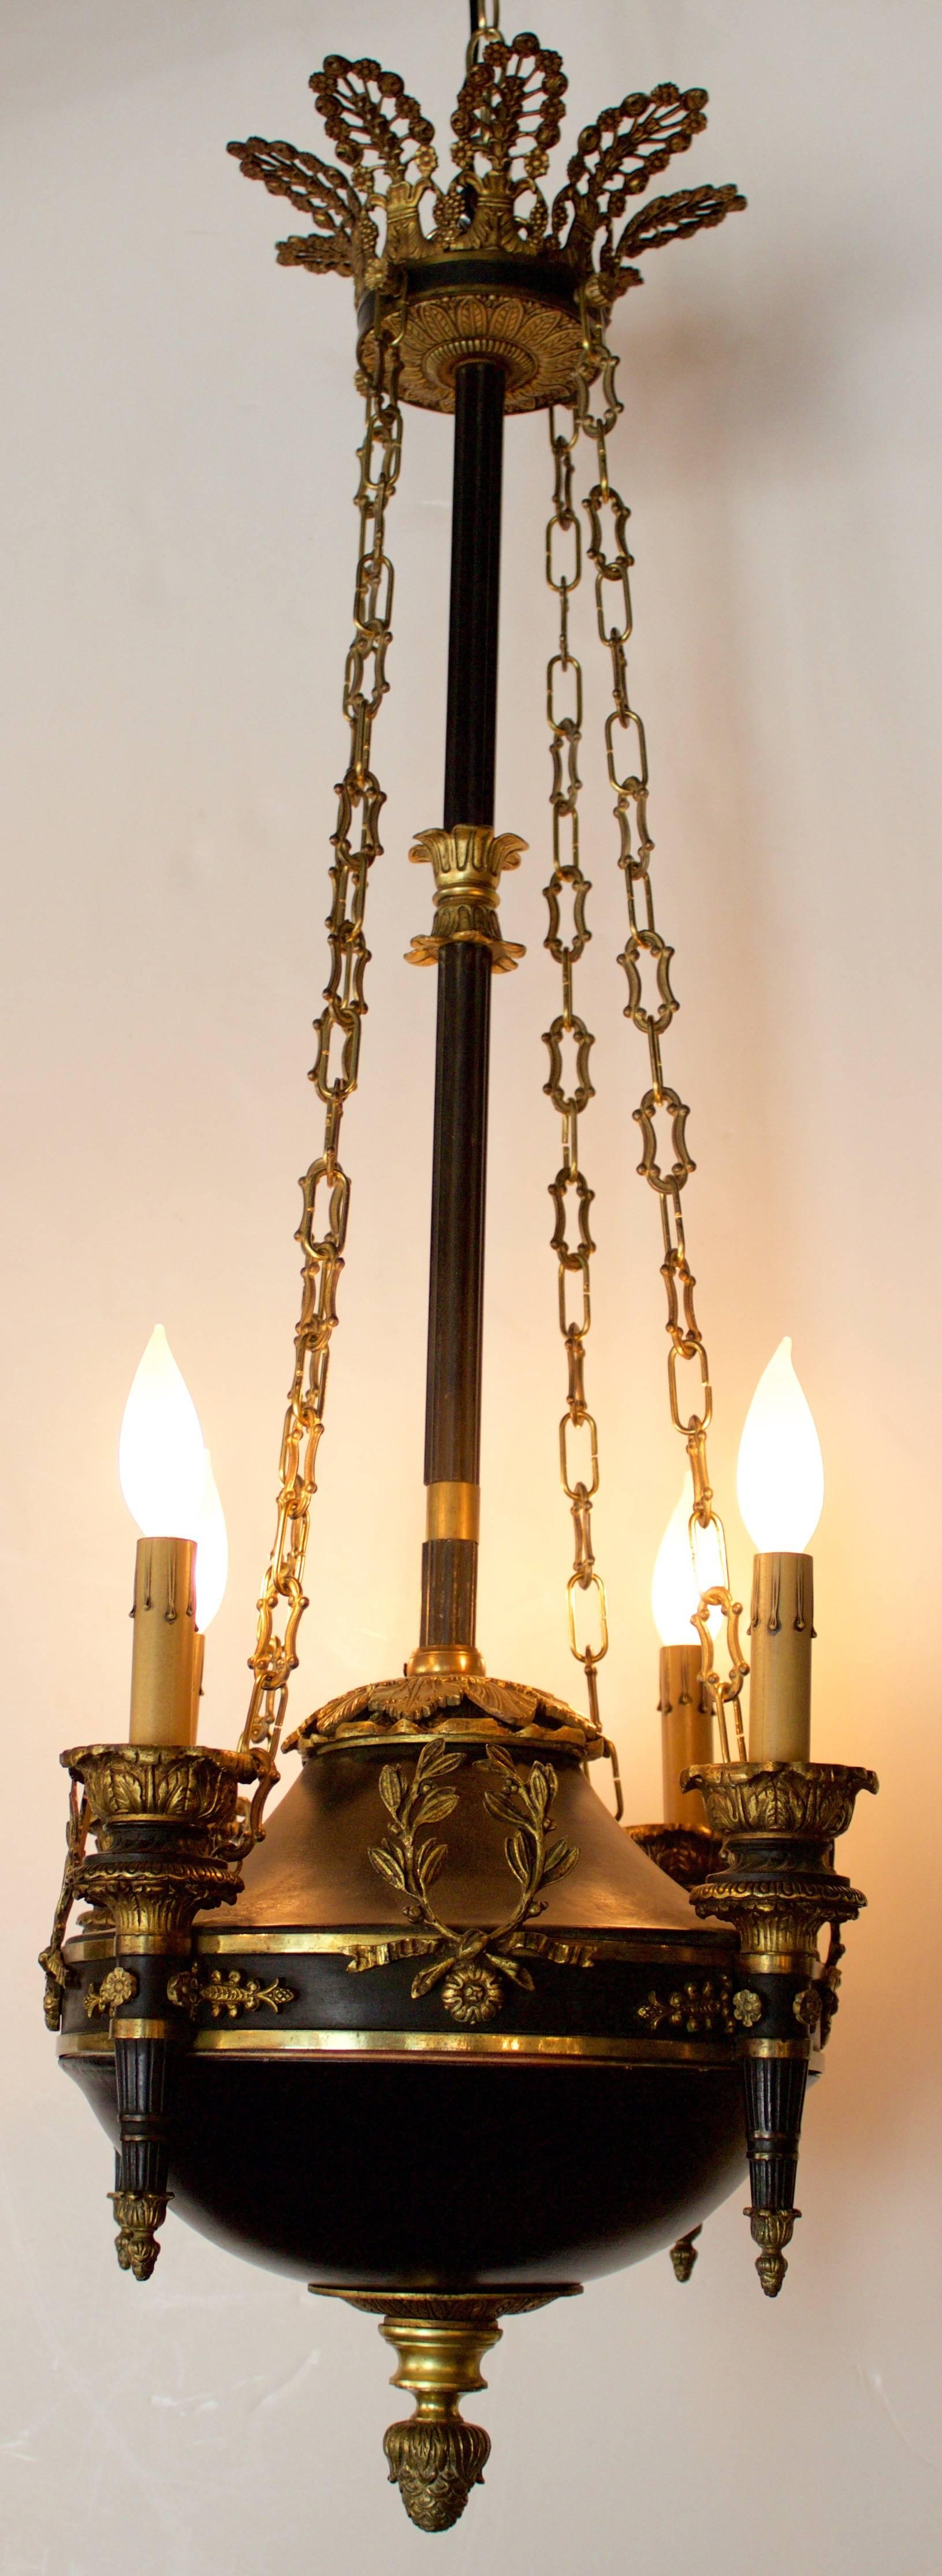 Interesting chandelier from very early 19th century in patinated and gilded bronze supported by a central shaft in bronze too and surmounted by a gorgeous 